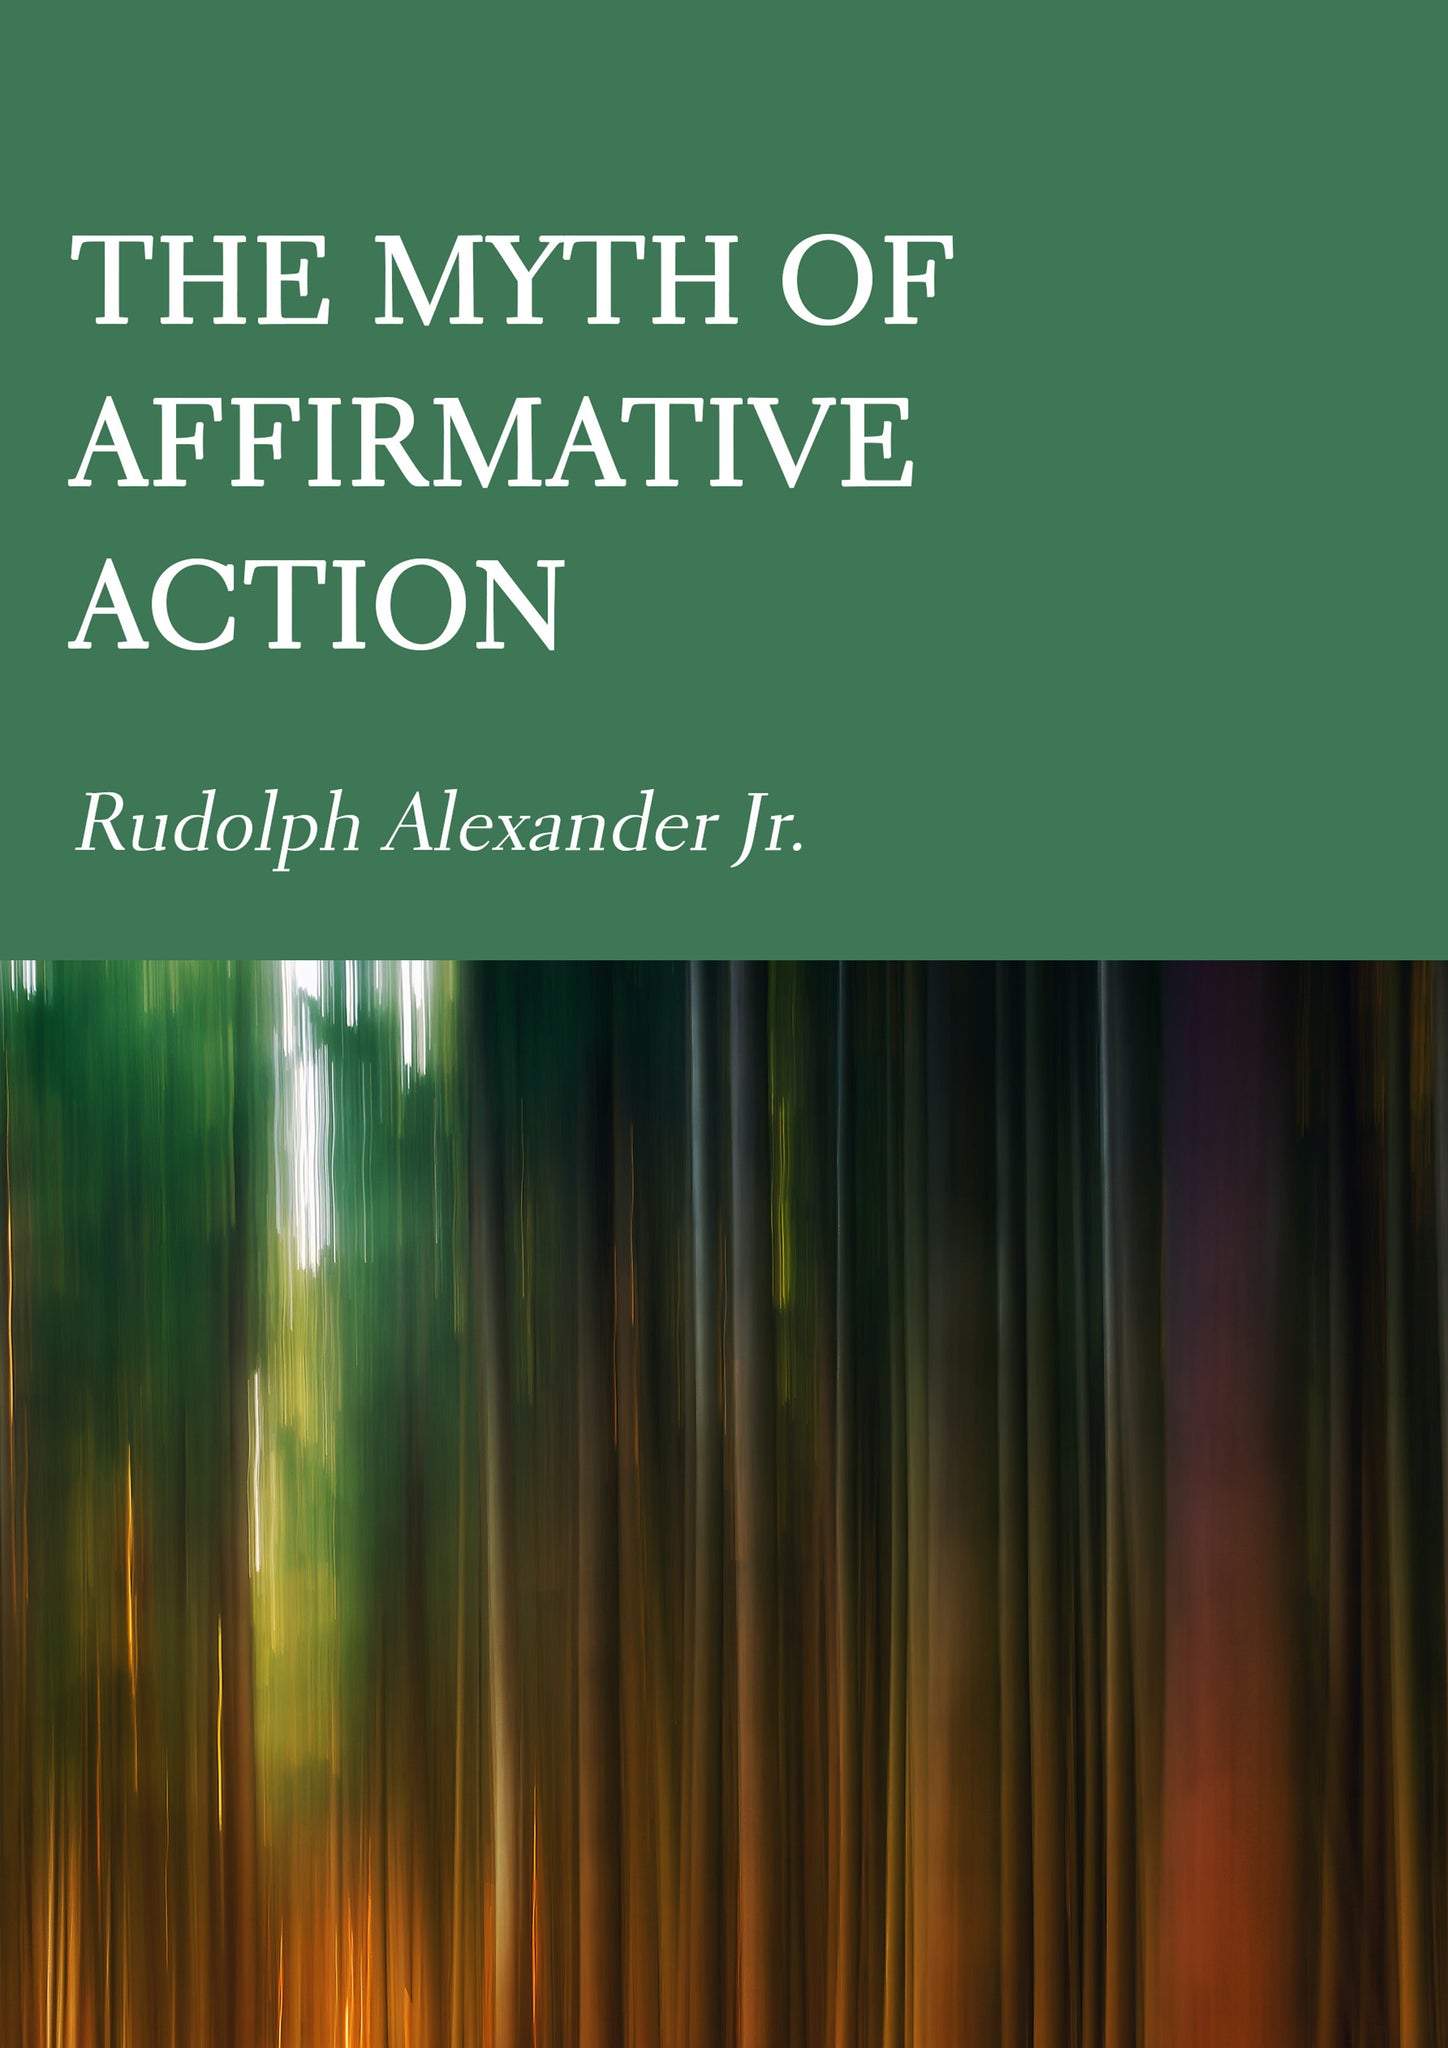 The Myth of Affirmative Action